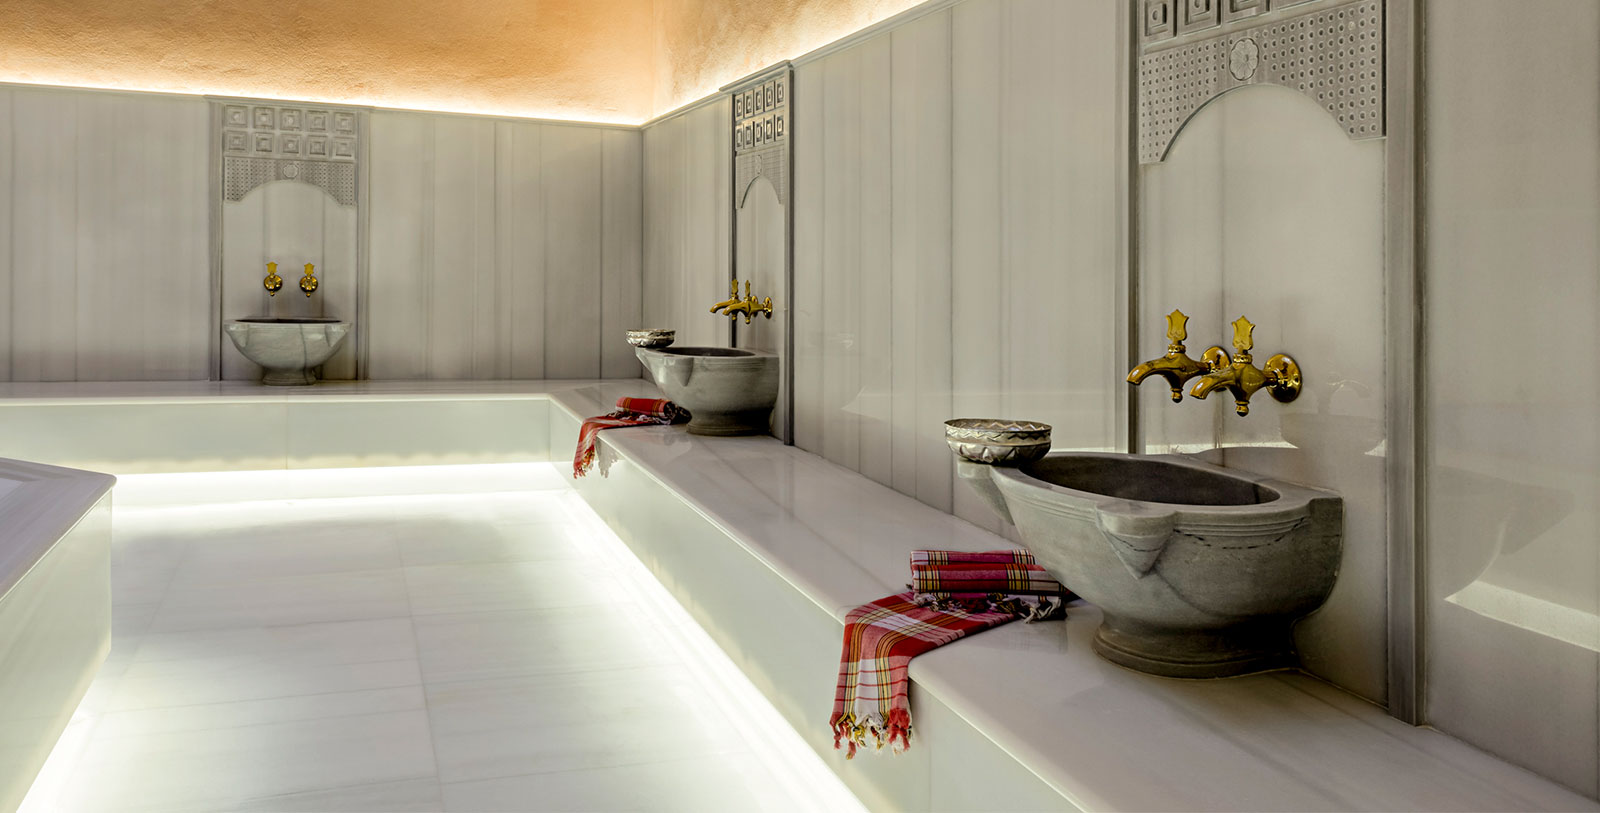 Image of The Hammam at The Galata Istanbul Hotel - MGallery by Sofitel, 1720, Member of Historic Hotels Worldwide, in Istanbul, Turkey, Spa